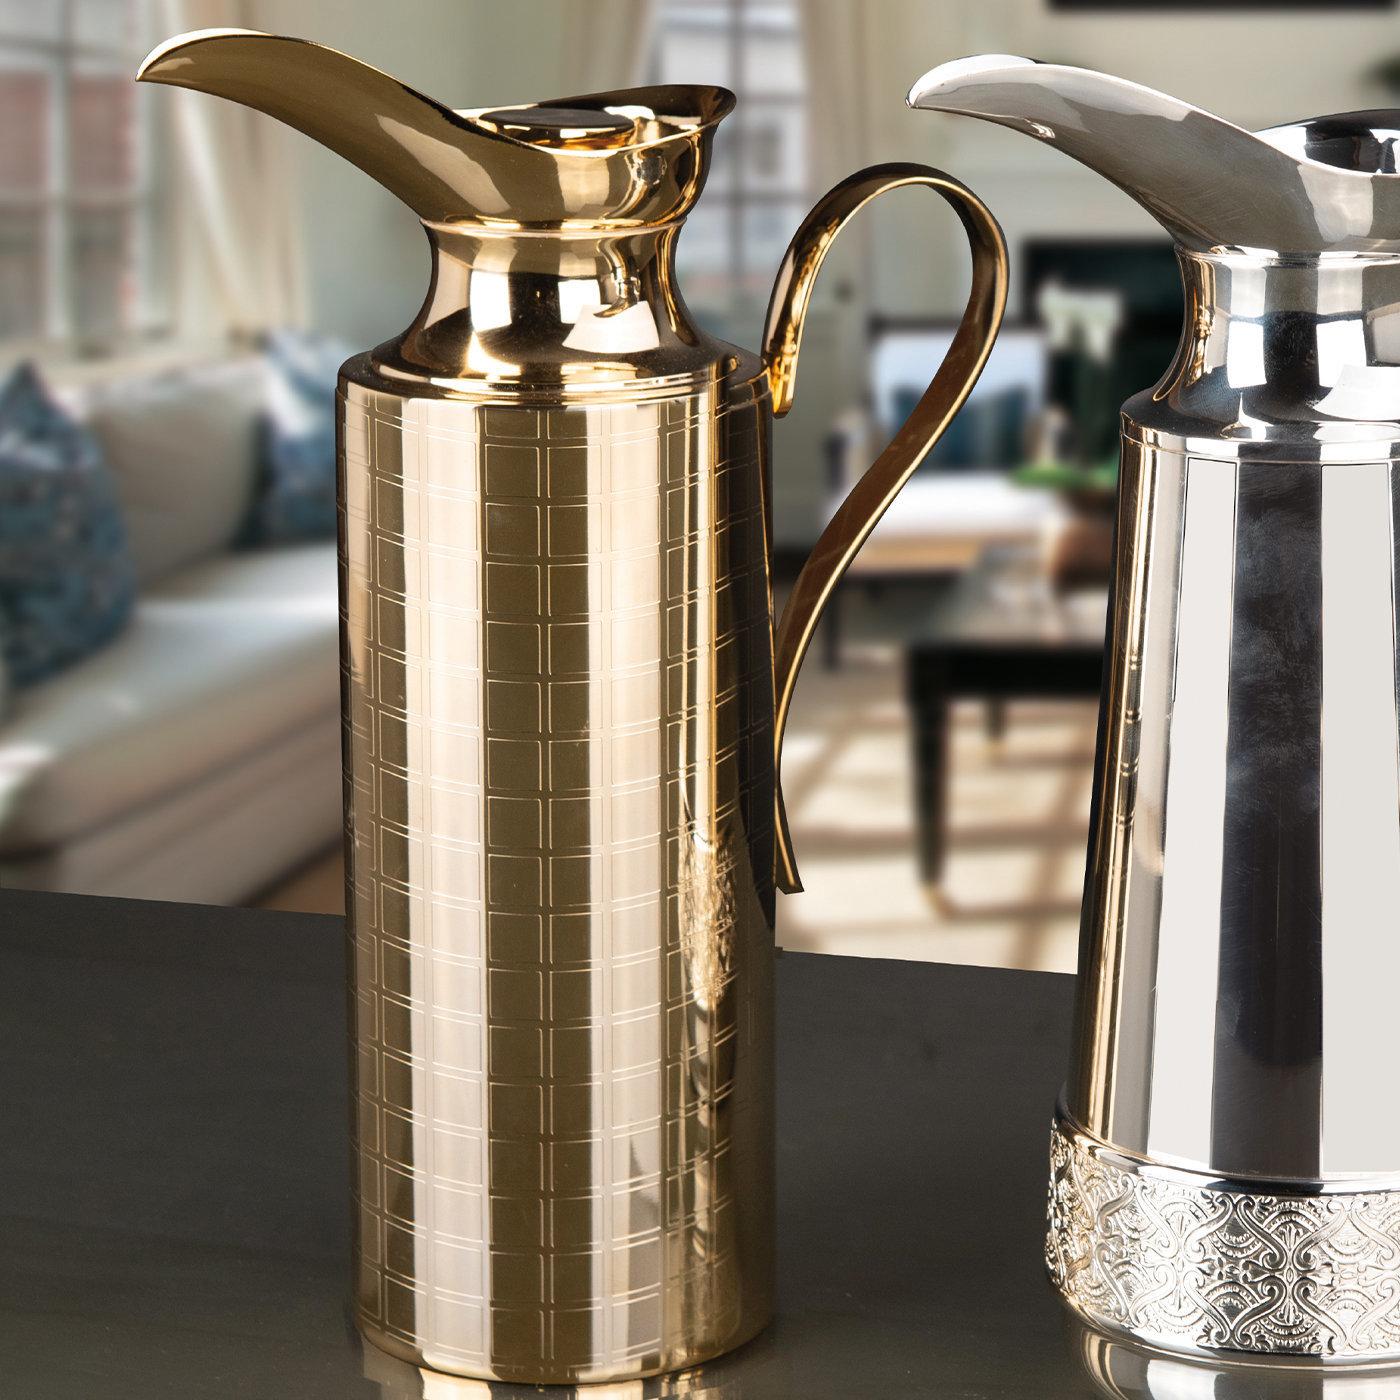 Entirely handcrafted of galvanized gold-finished brass, this spectacular pitcher will preciously adorn a dining table during a special occasion. Boasting a sleek, classic-inspired silhouette, it is interpreted in a modern key through an exquisite